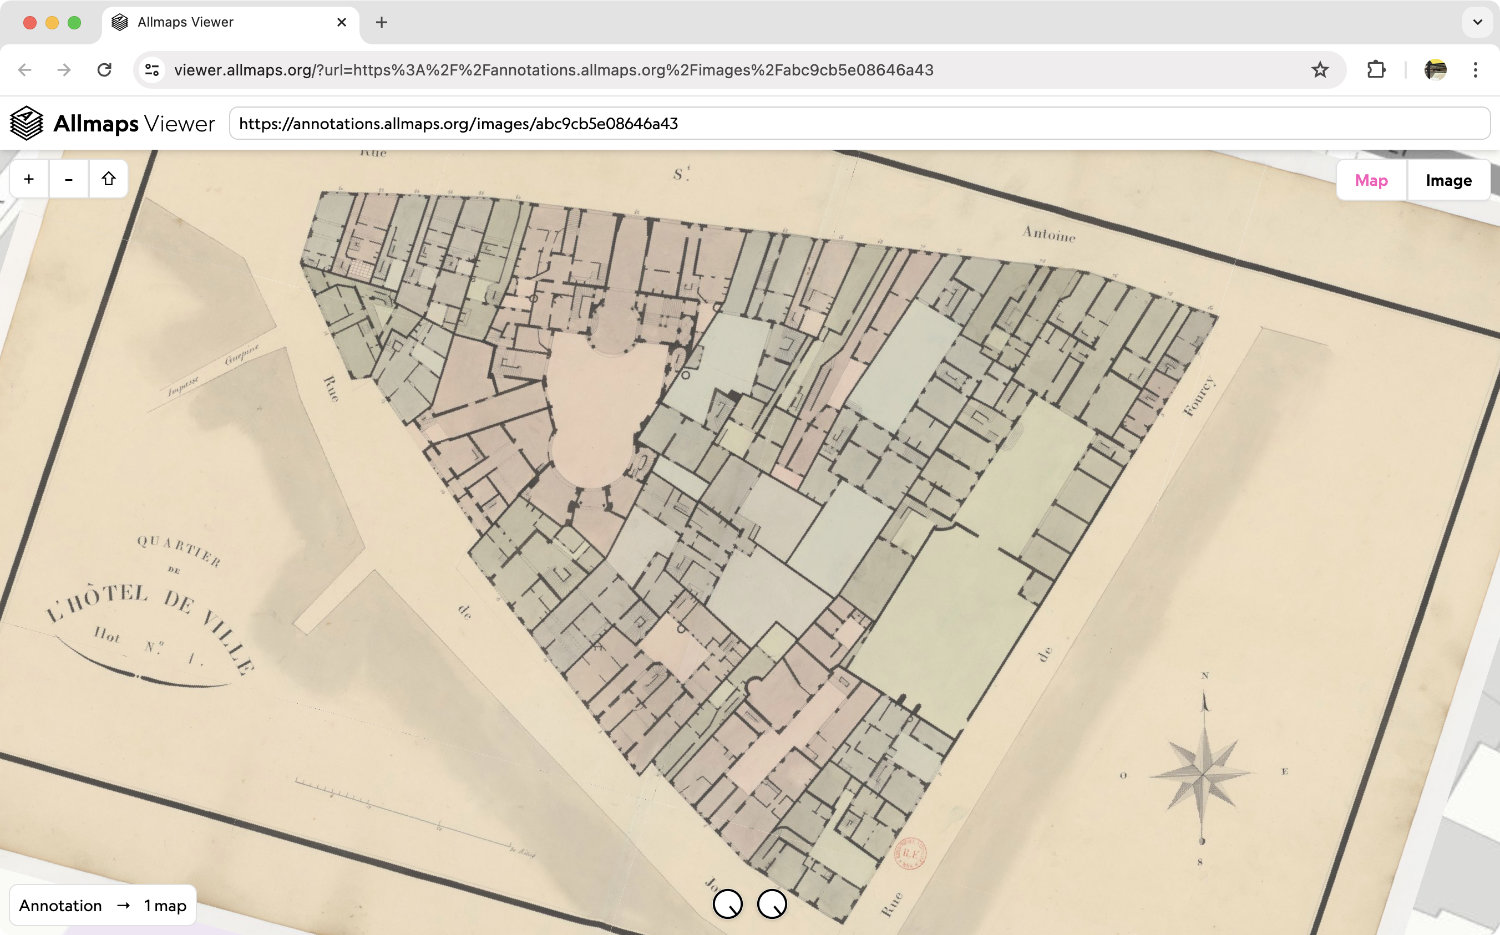 Single cadastral sheet opened in Allmaps Viewer